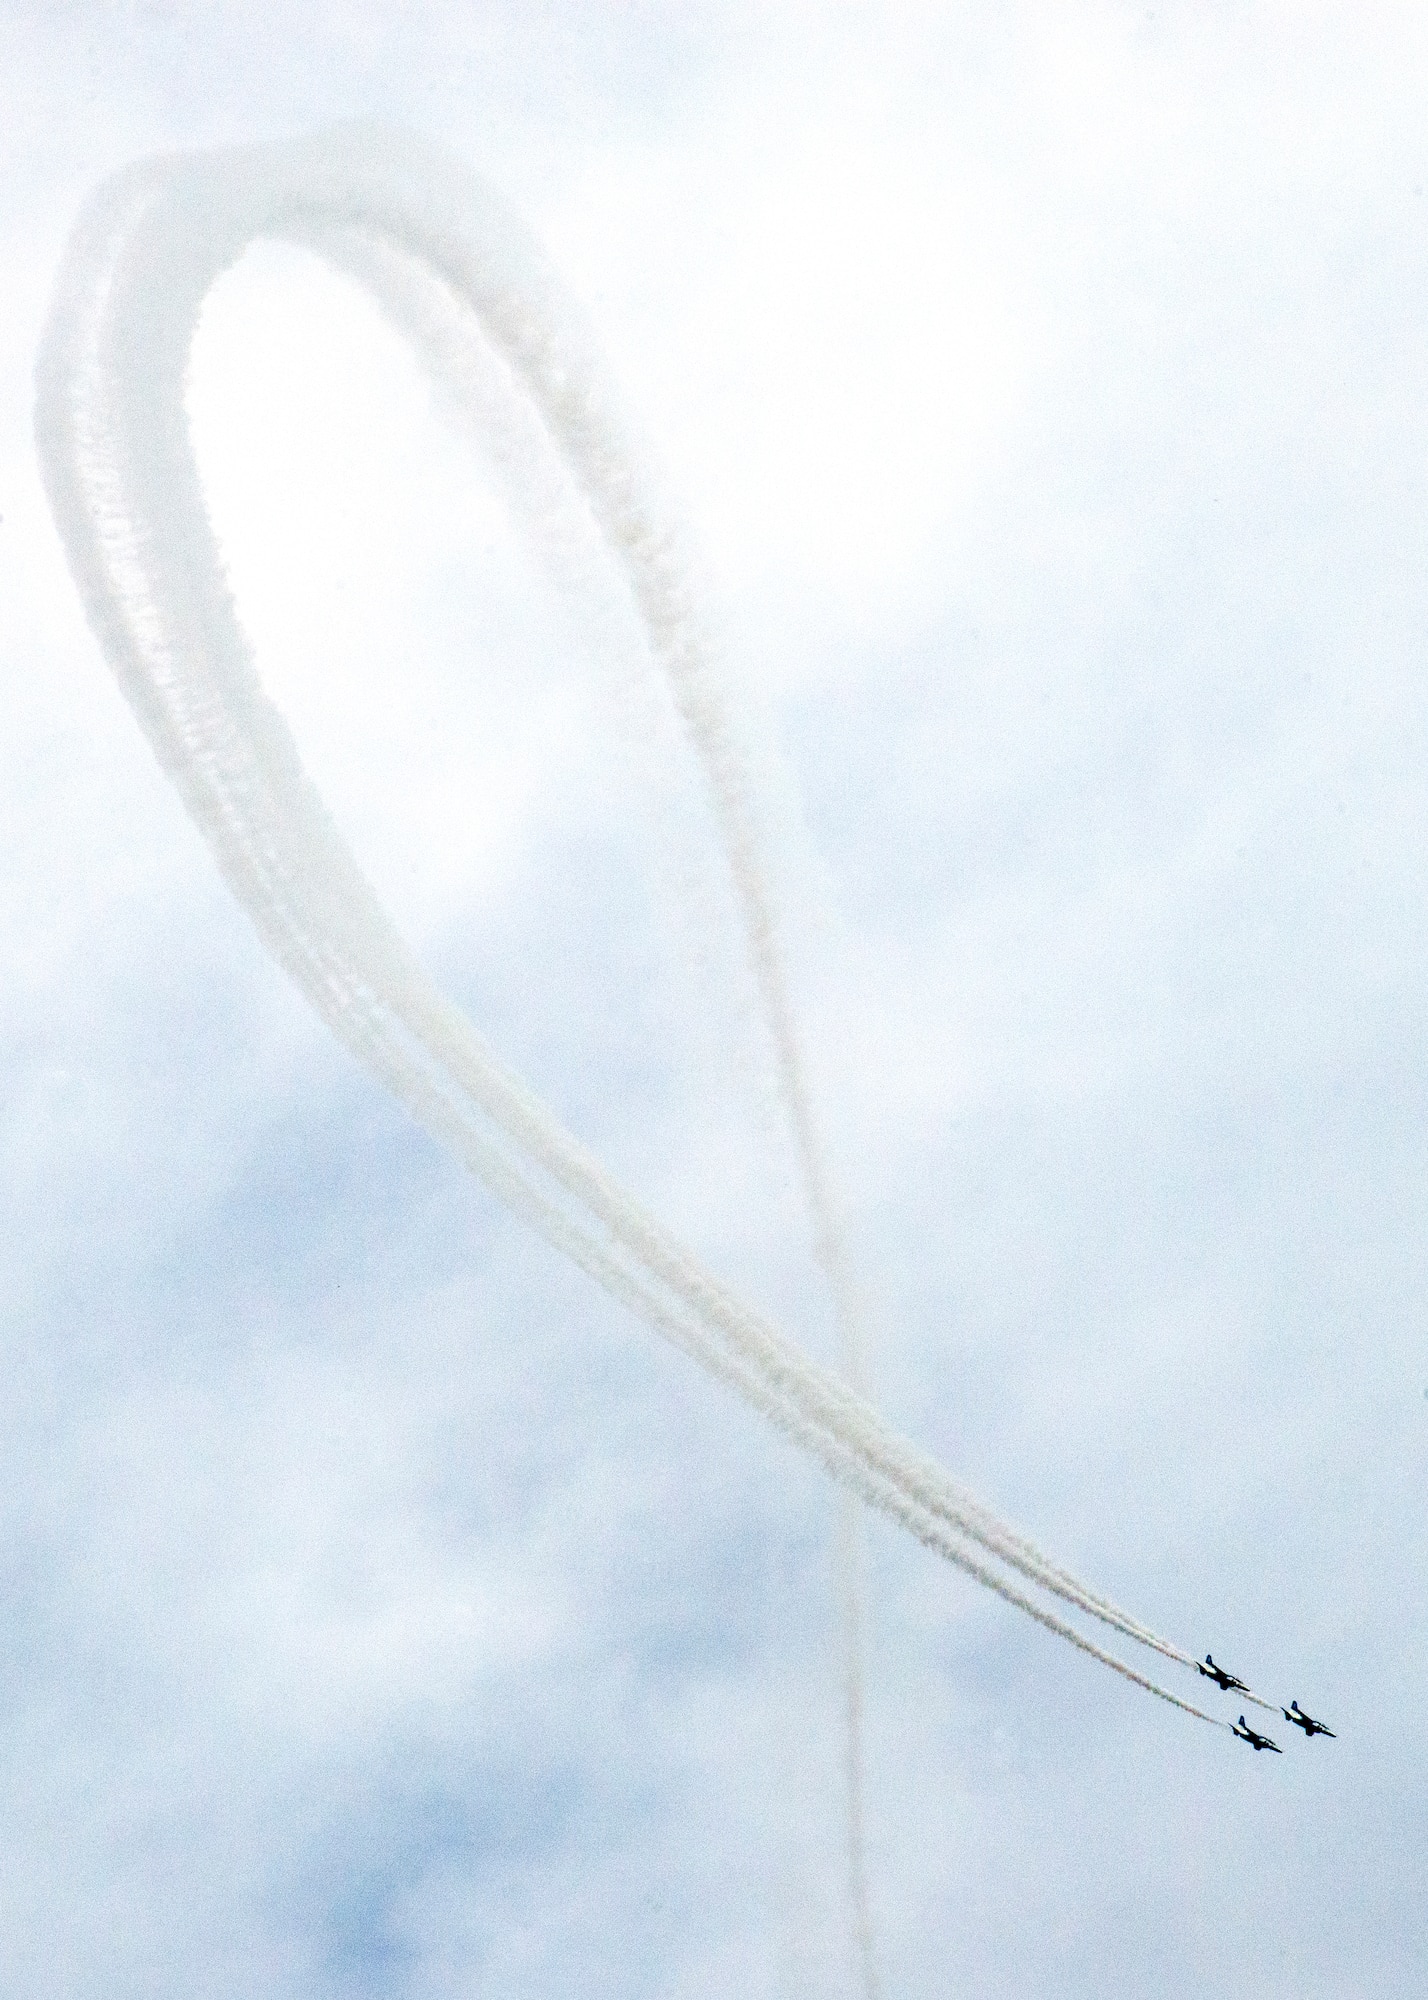 The Japan Air Self-Defense Force aerobatic team, Blue Impulse, draws a large ribbon in the sky during the annual Iruma Air Show at Iruma Air Base, Japan, Nov. 3, 2013. Blue Impulse performed many maneuvers during the show. (U.S. Air Force photo by Airman 1st Class Soo C. Kim / Released)